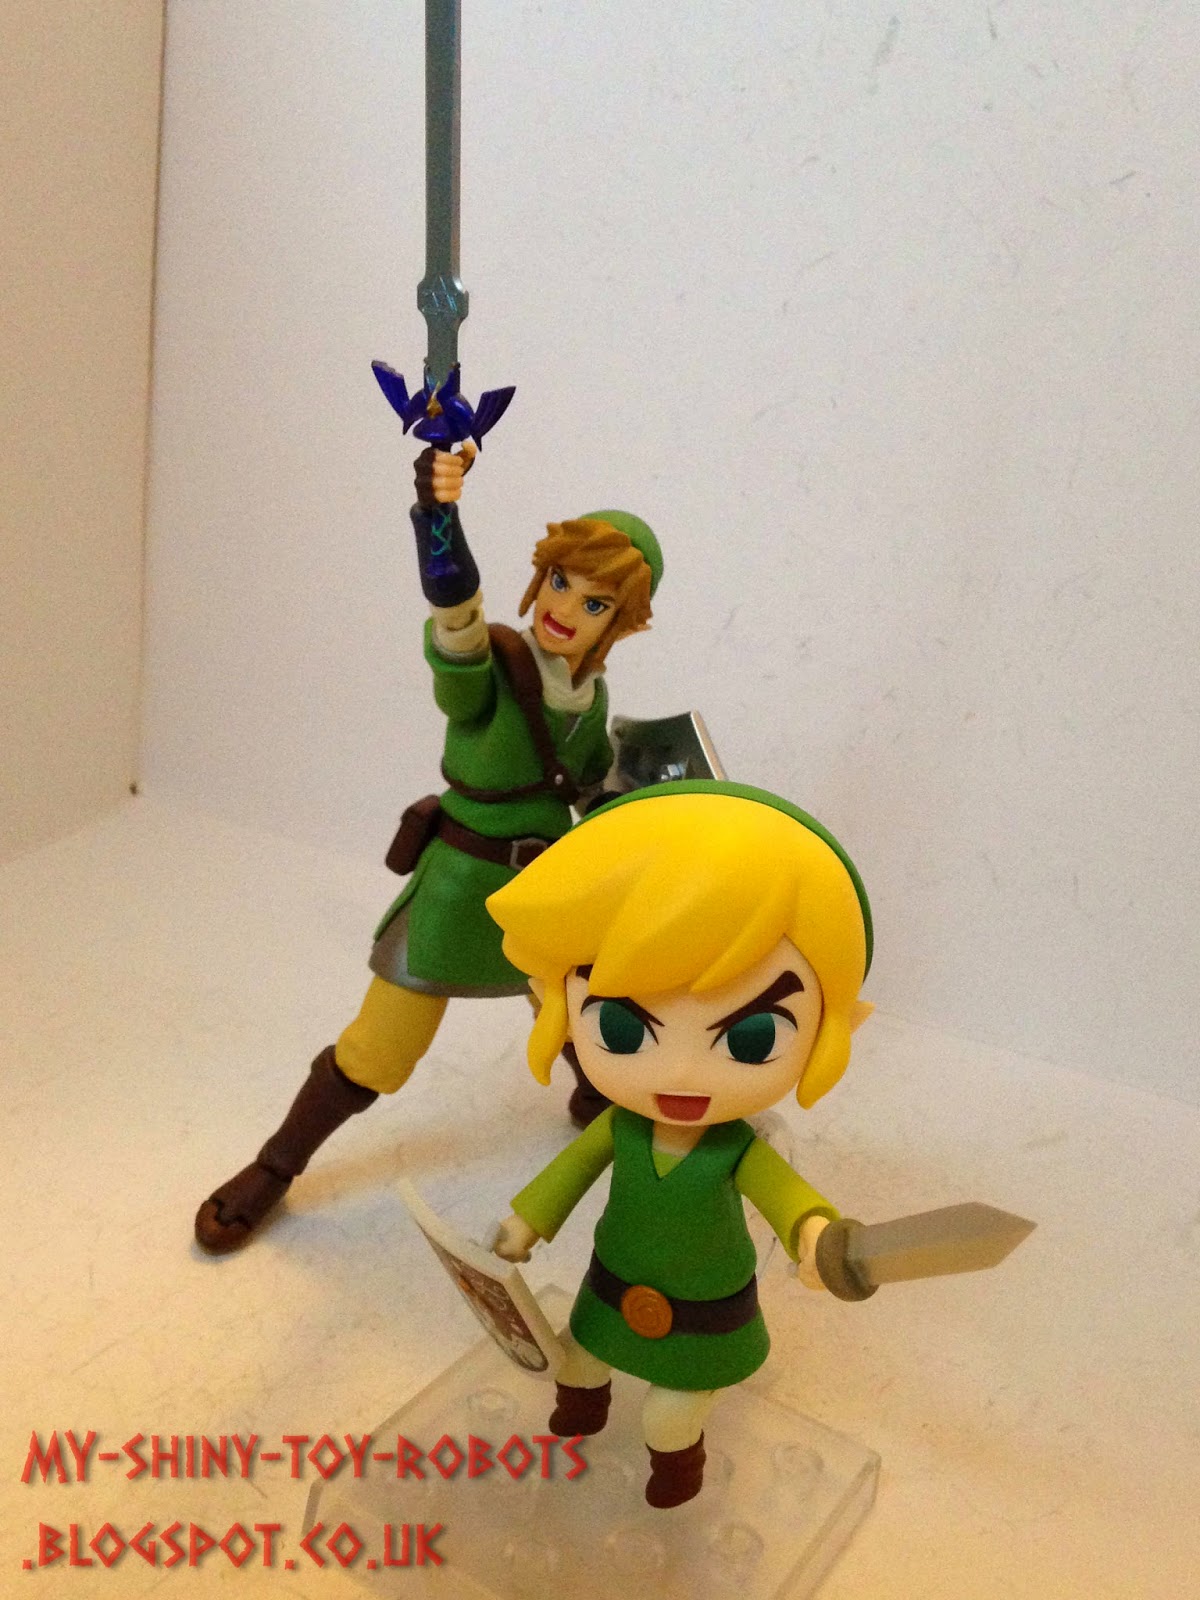 Link with his Figma brother